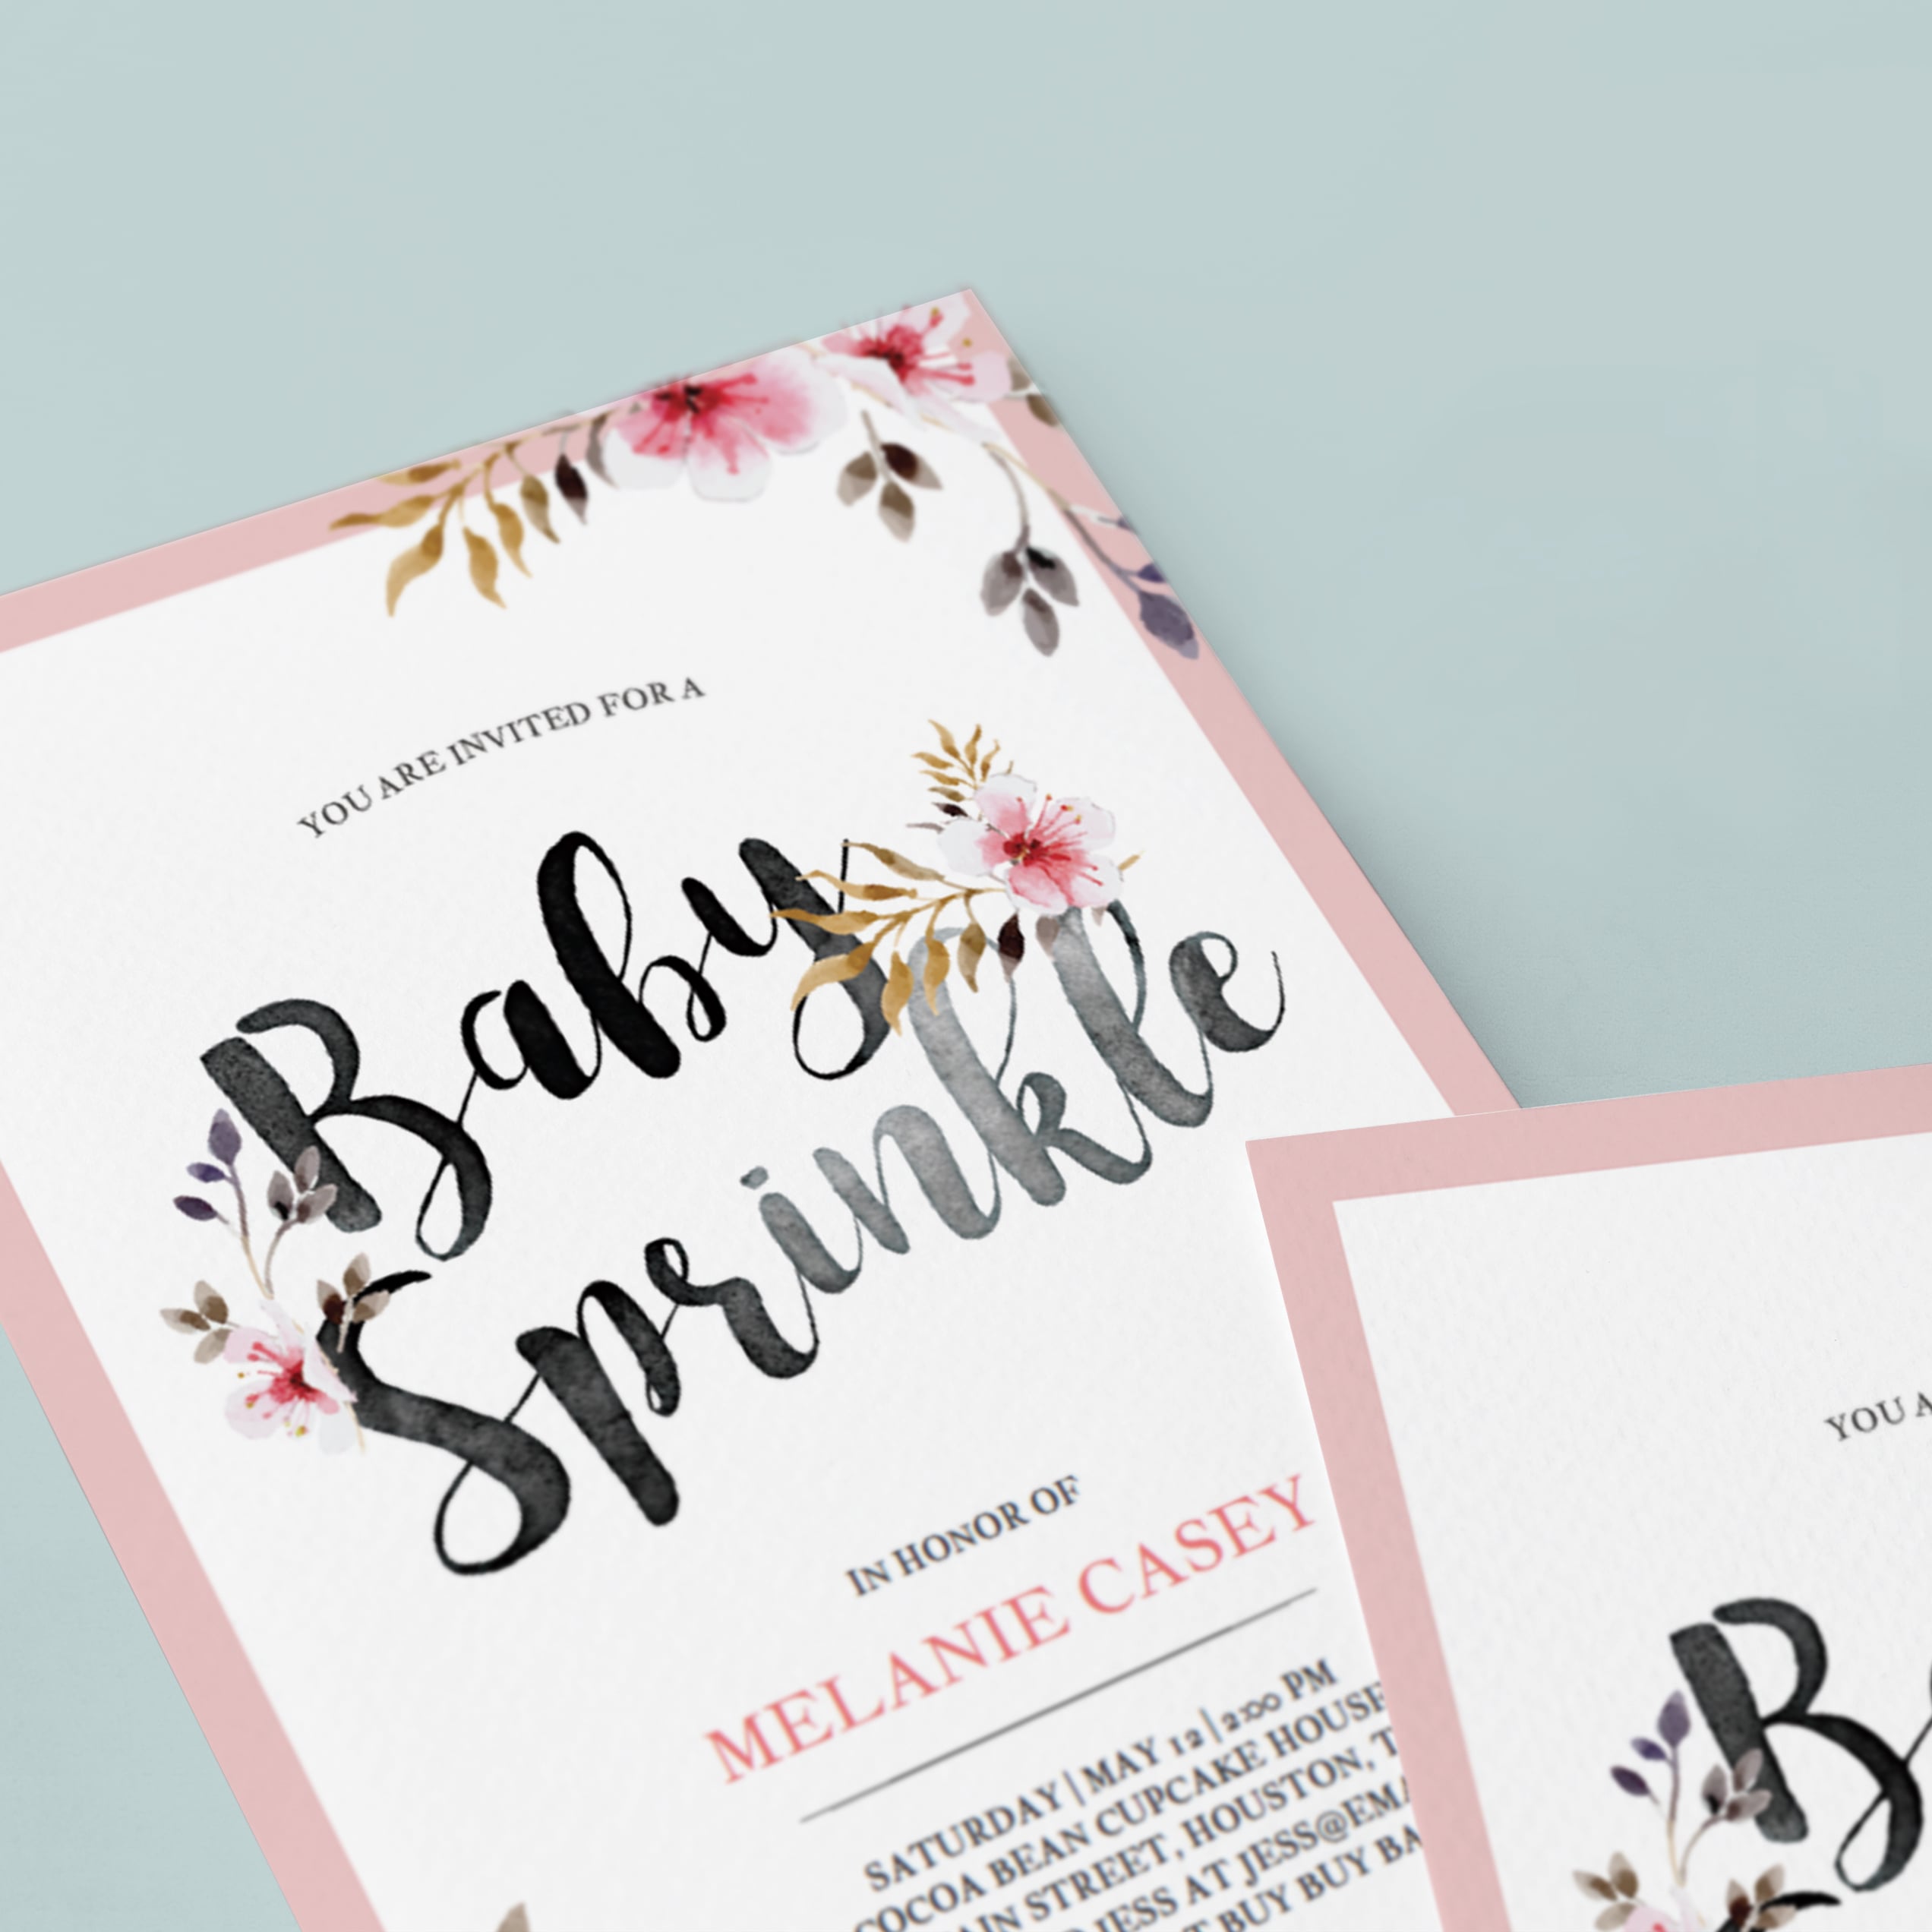 Watercolor flowers on pink baby sprinkle invitation by LittleSizzle